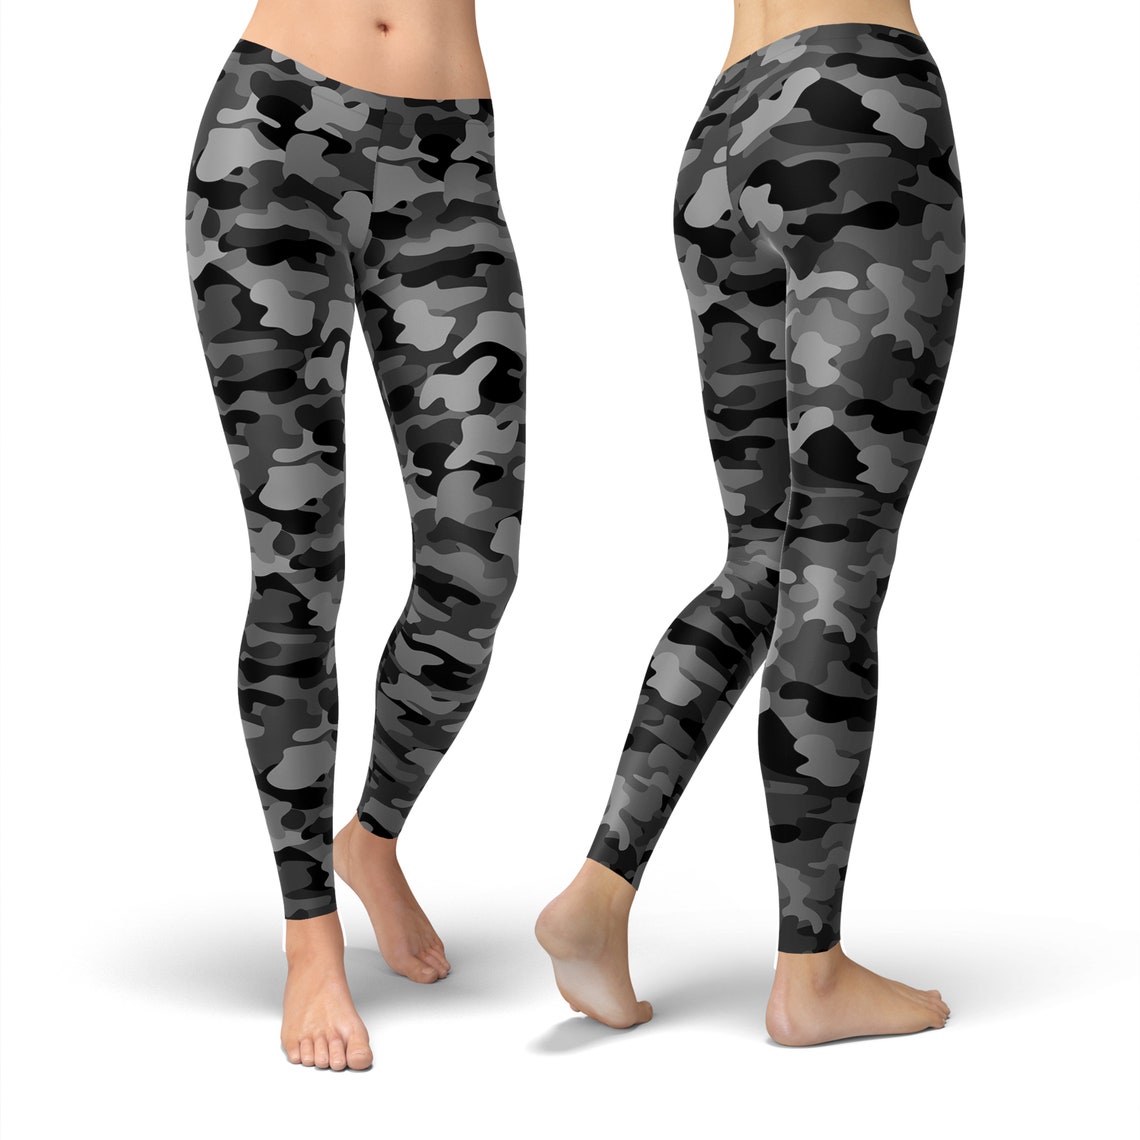 Black Camouflage Leggings Black Outdoor Tights Camouflage - Etsy